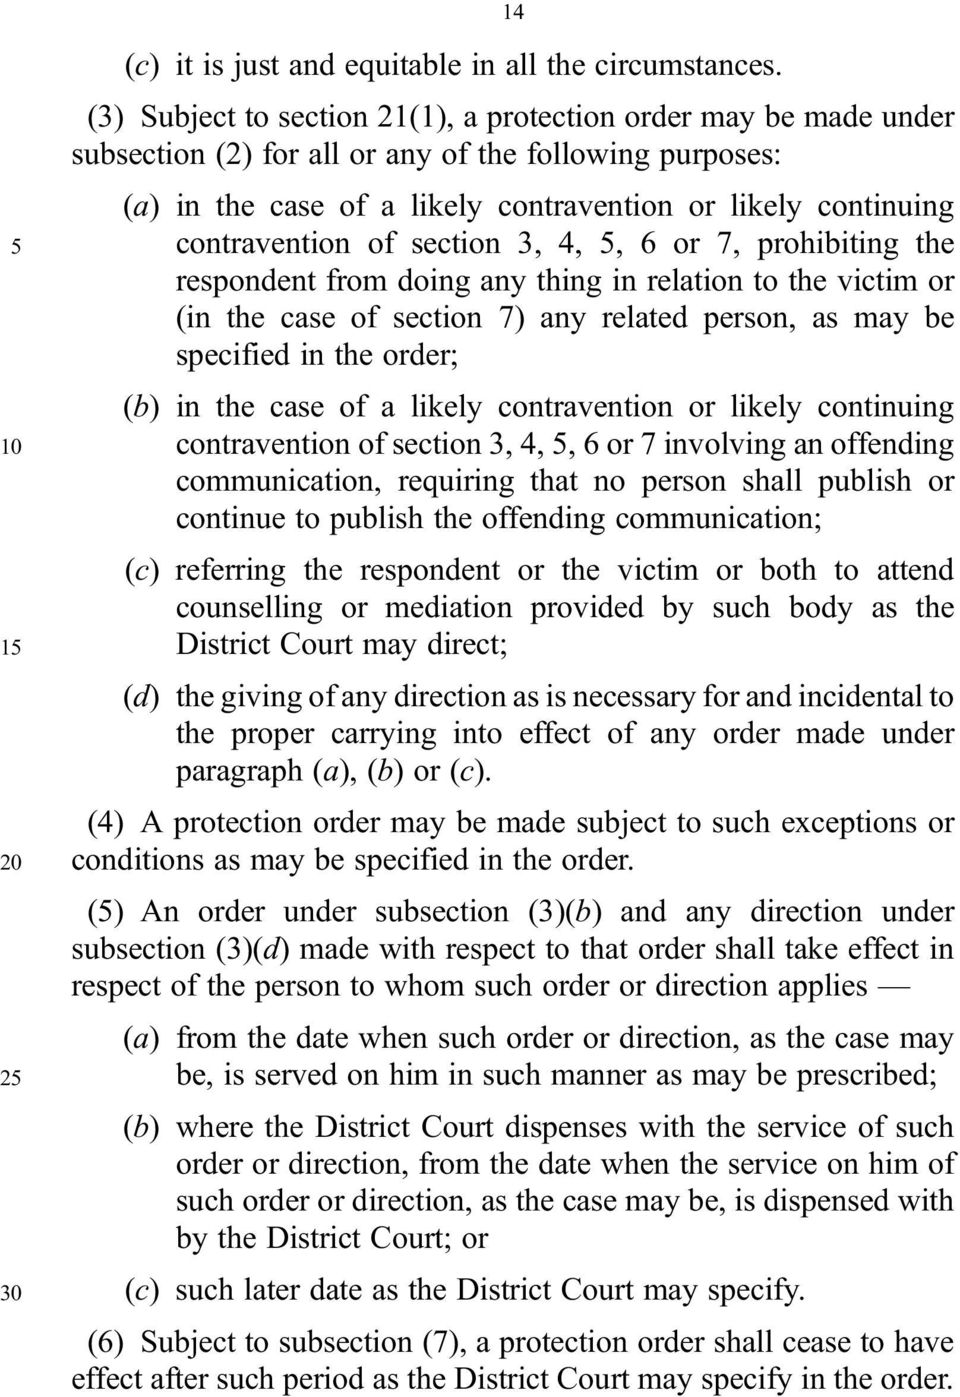 contravention of section 3, 4, 5, 6 or 7, prohibiting the respondent from doing any thing in relation to the victim or (in the case of section 7) any related person, as may be specified in the order;